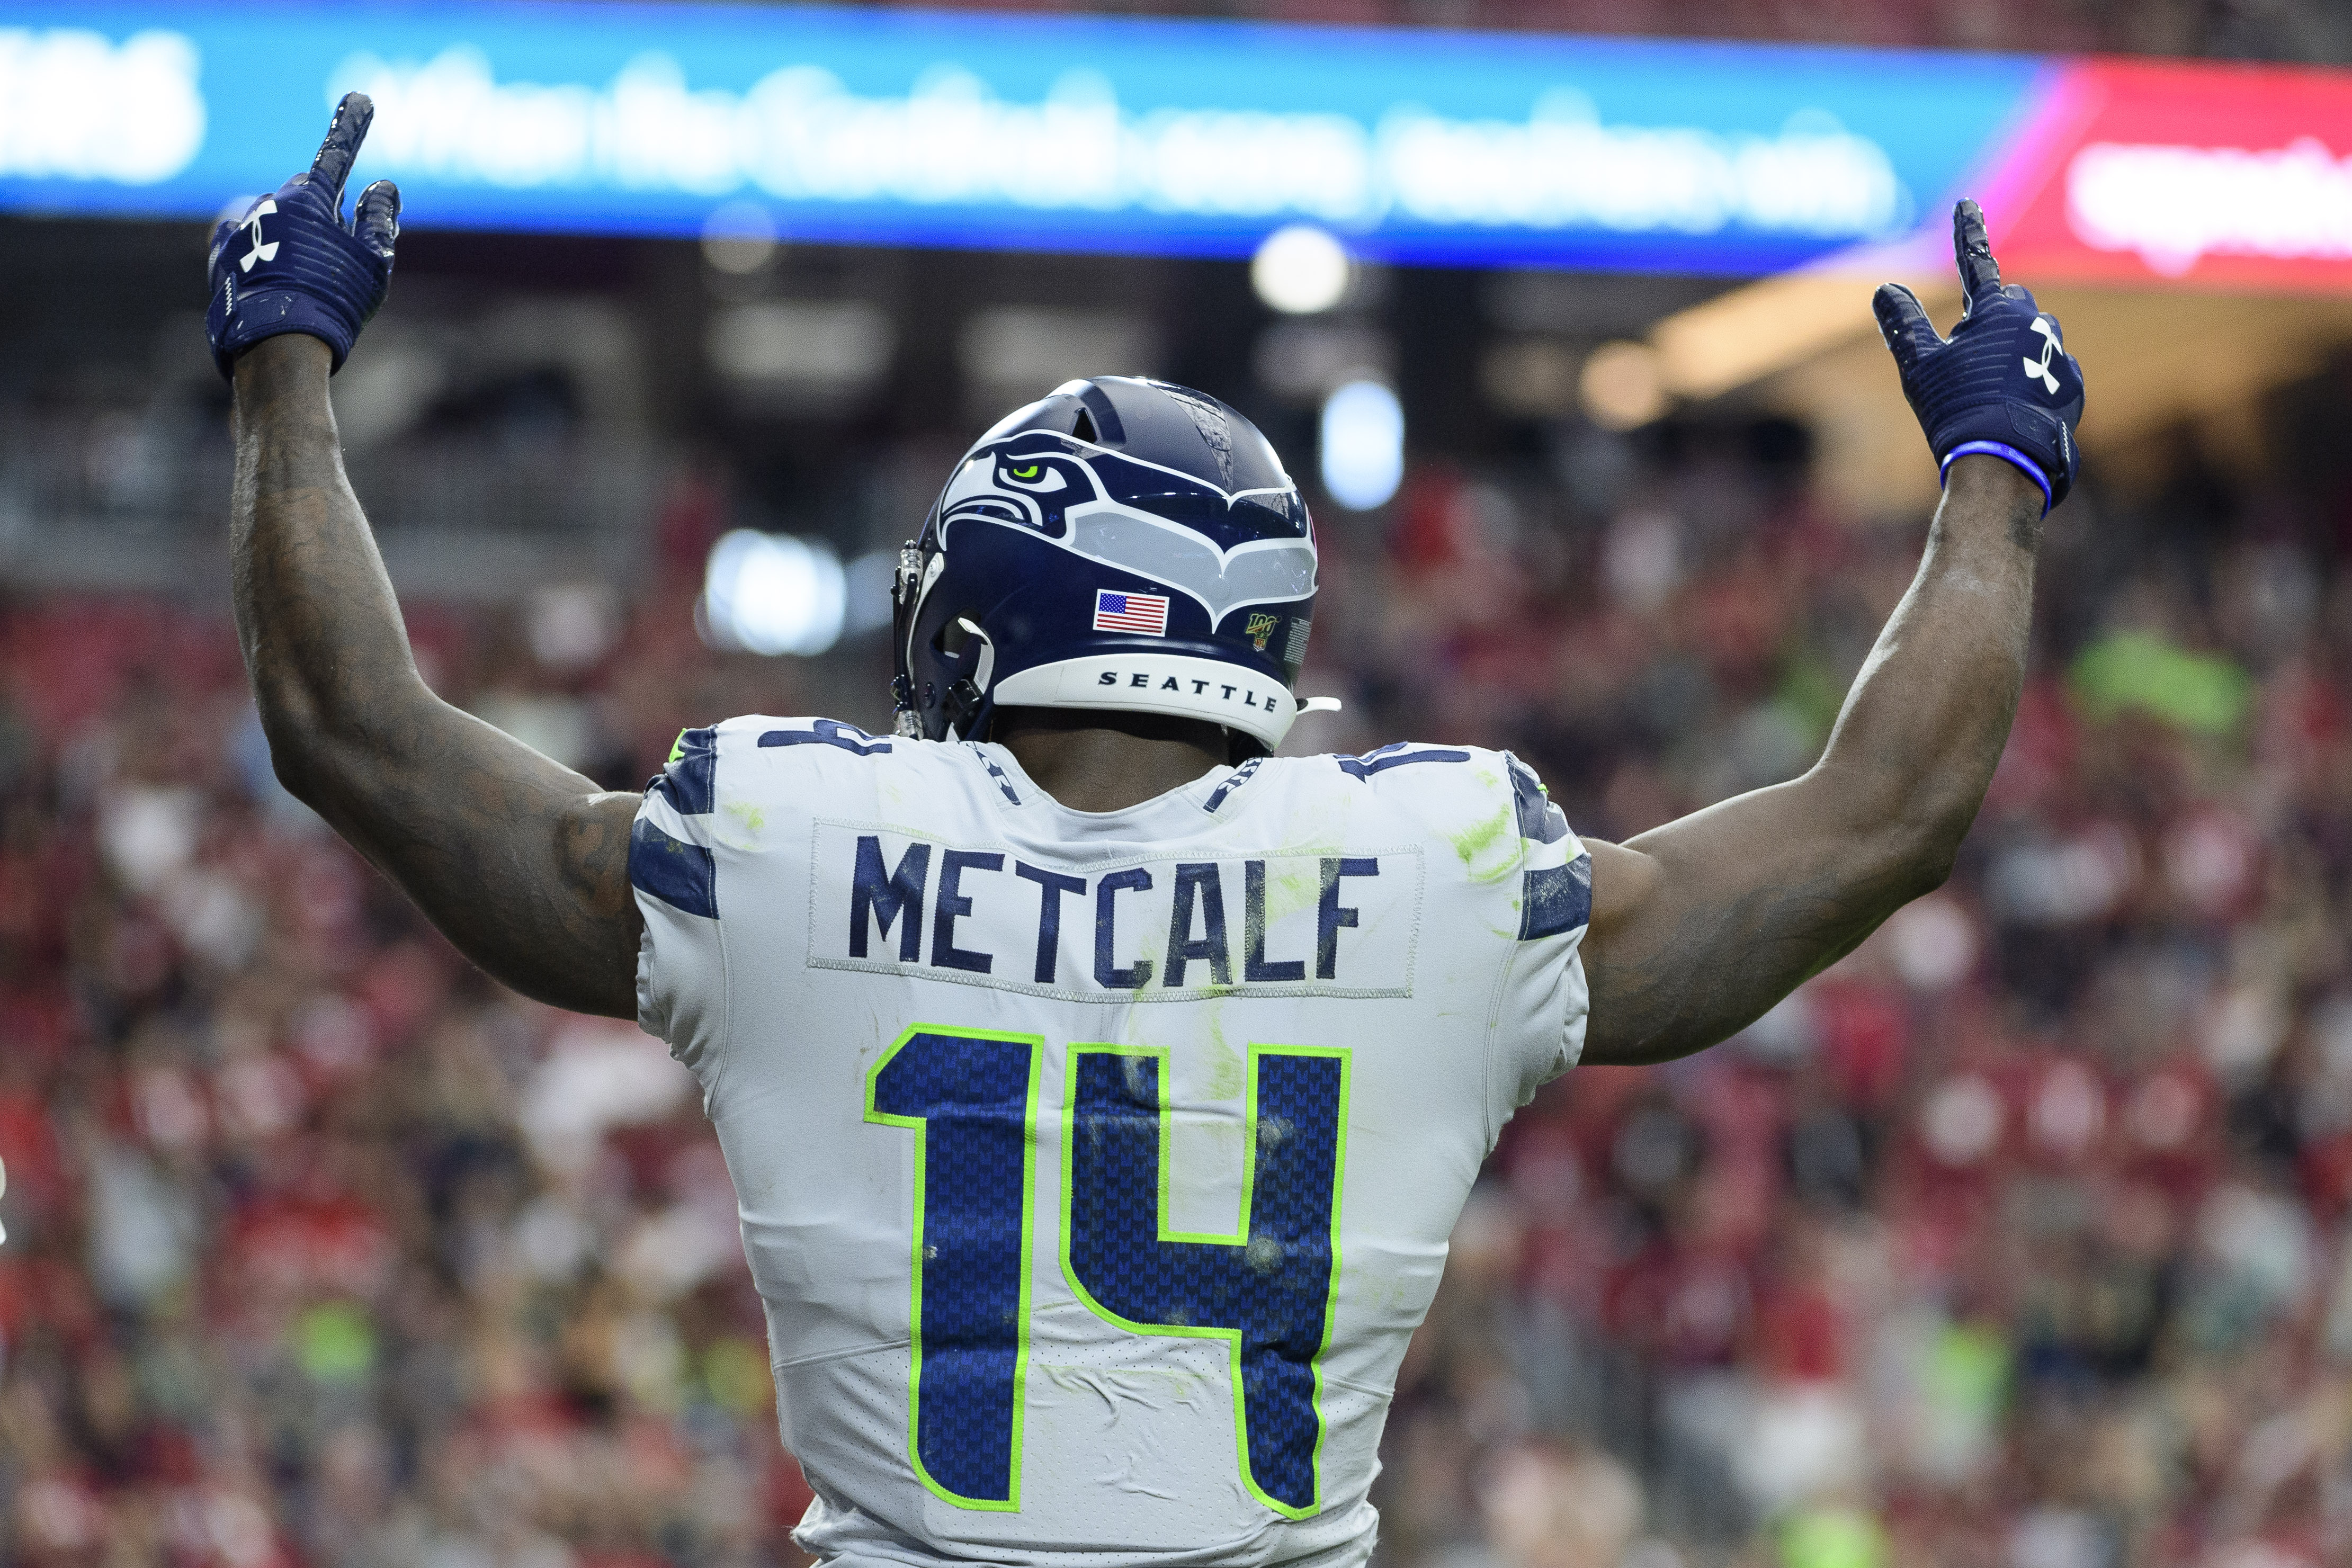 Seahawks wide receiver DK Metcalf to compete at 2021 Golden Games